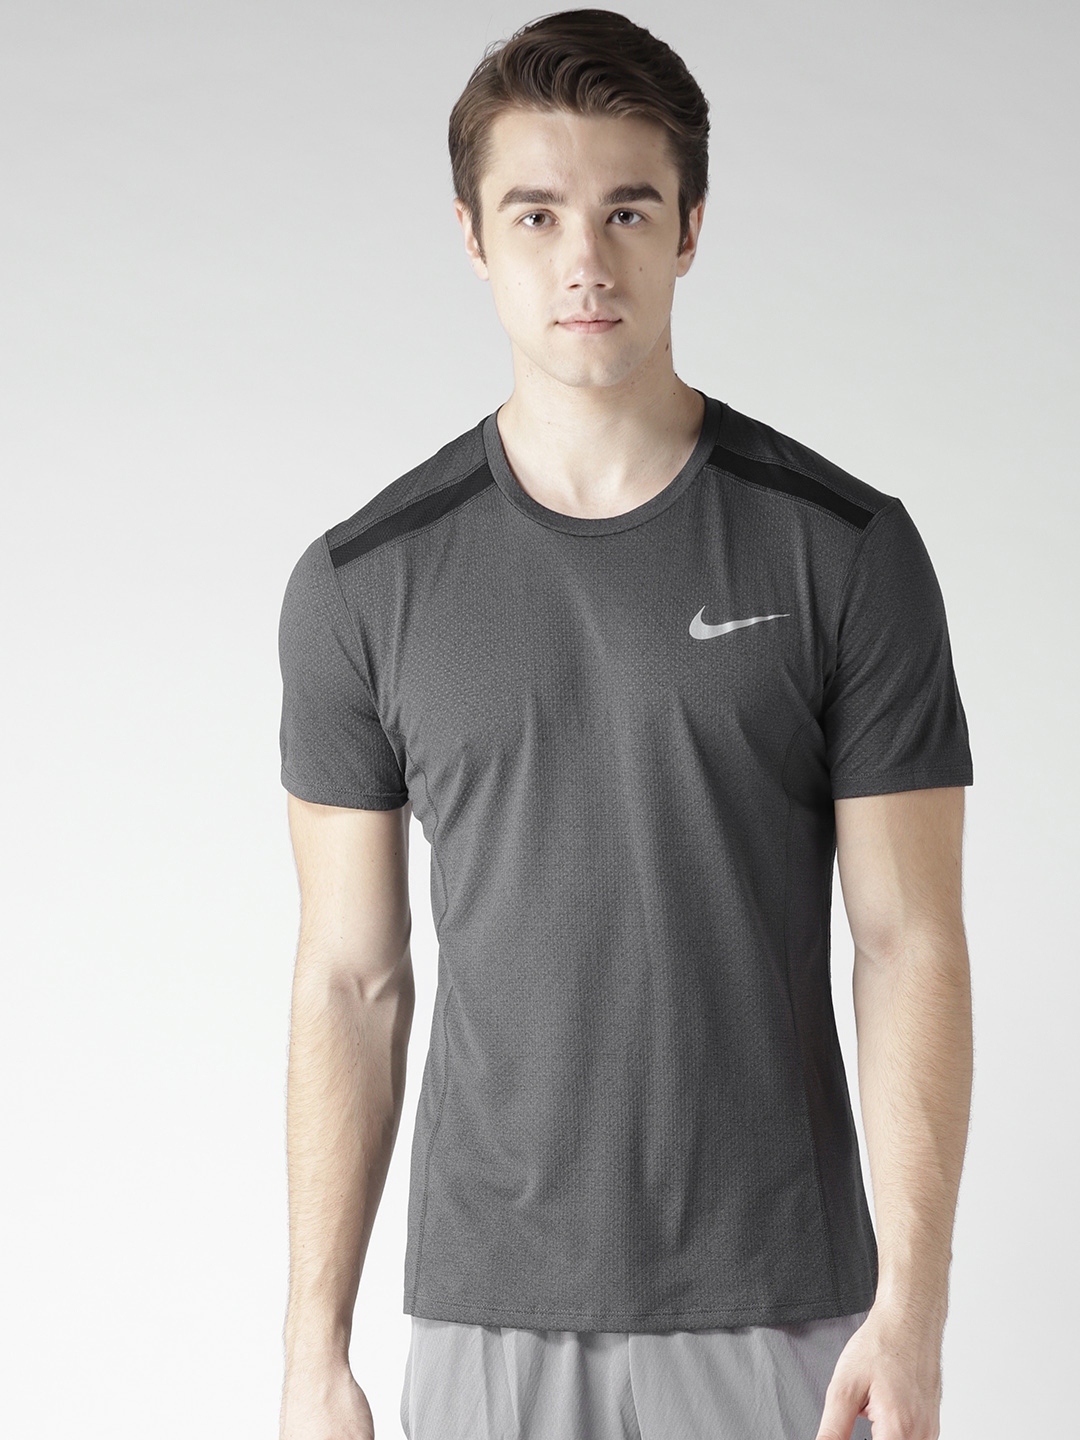 Buy Nike Charcoal Grey Standard Fit T - Tshirts for Men 2529614 | Myntra